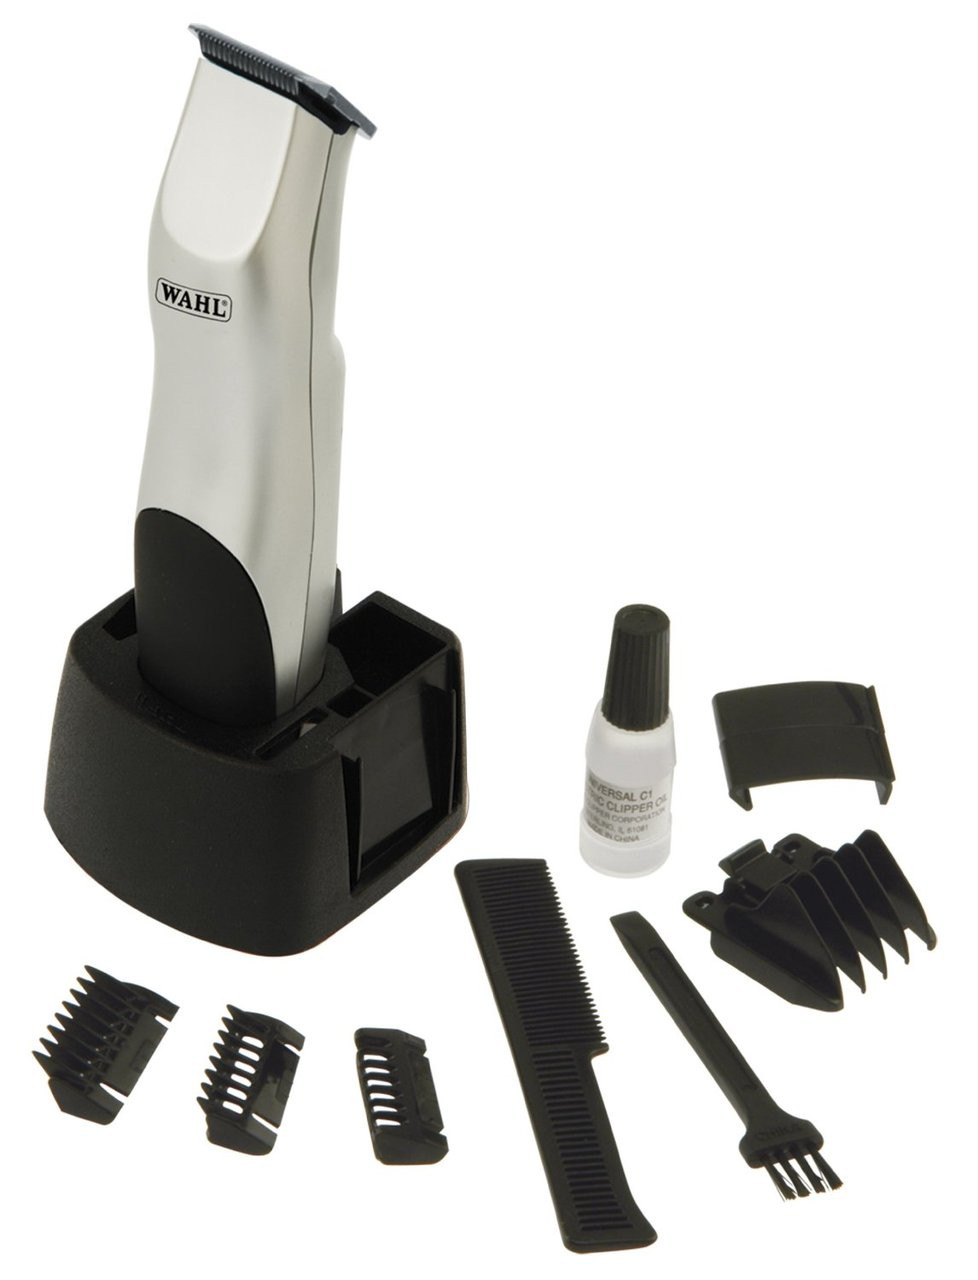 wahl groomsman cordless trimmer